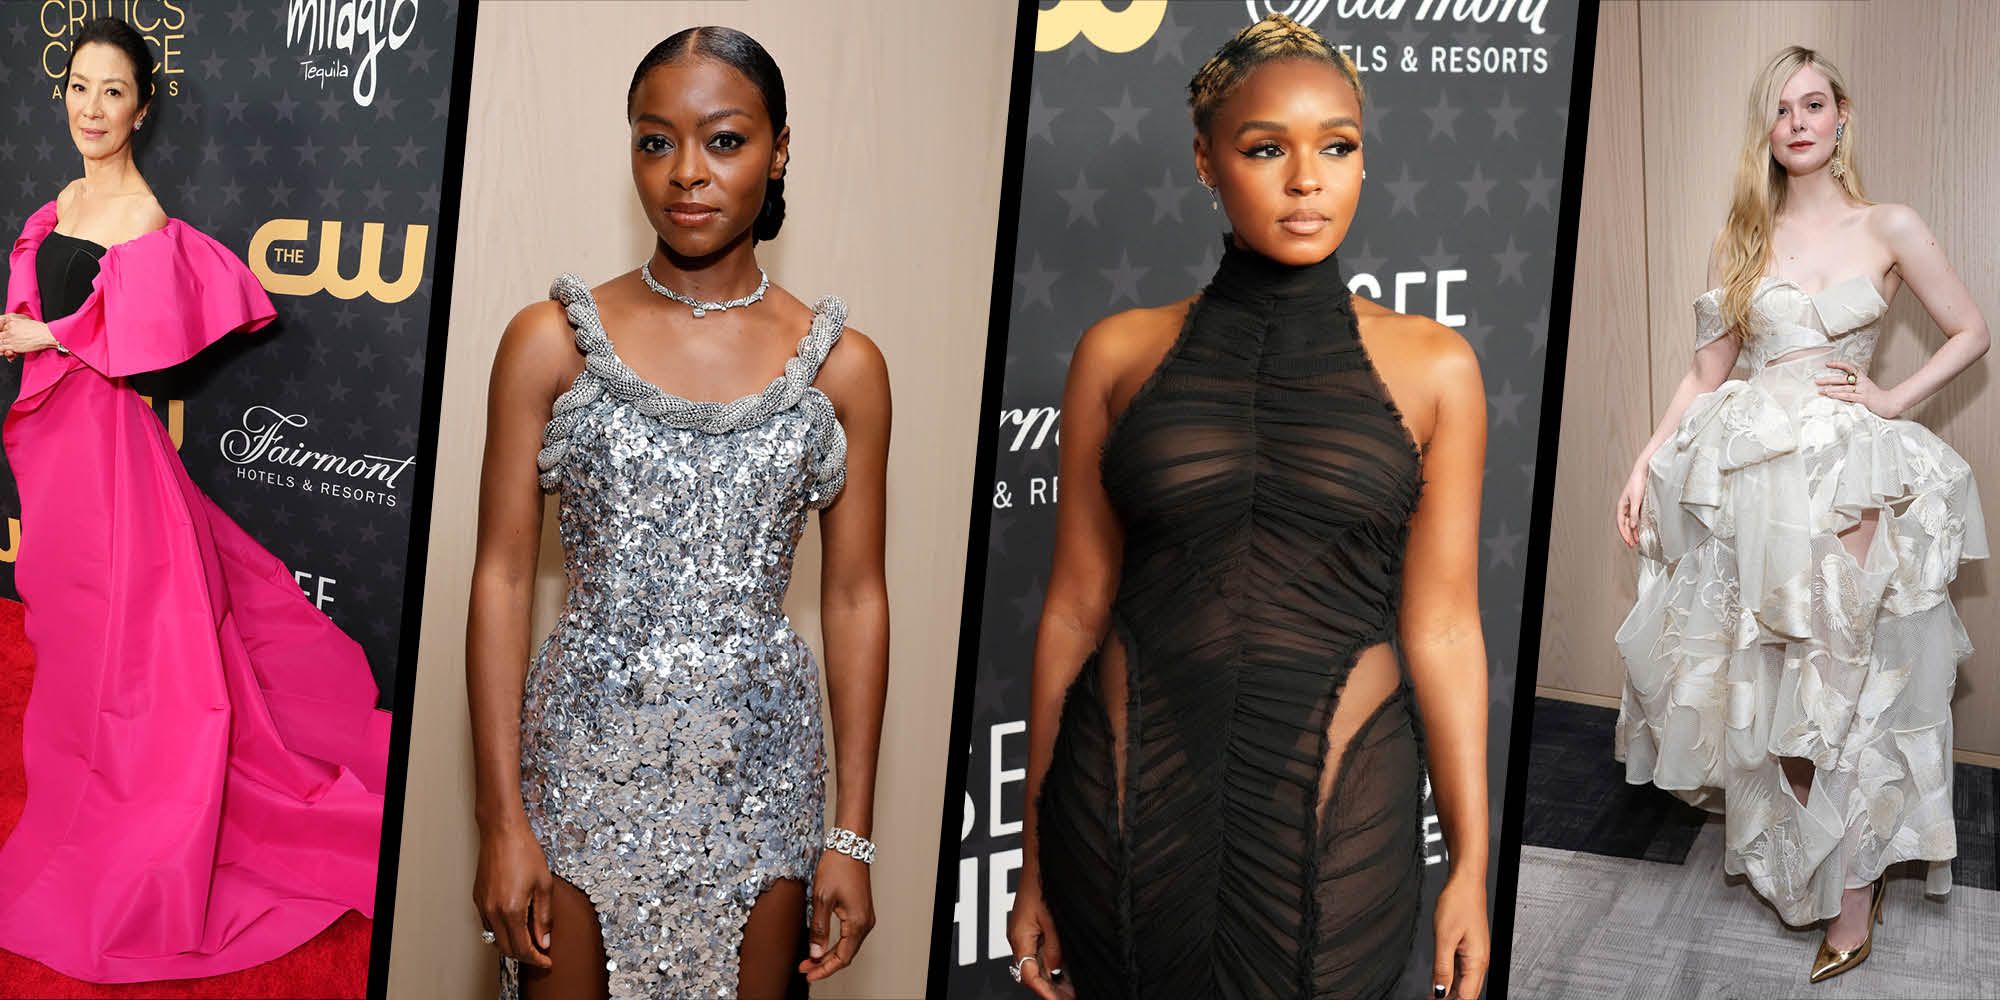 The Best Dressed Stars at the 2023 Critics Choice Awards